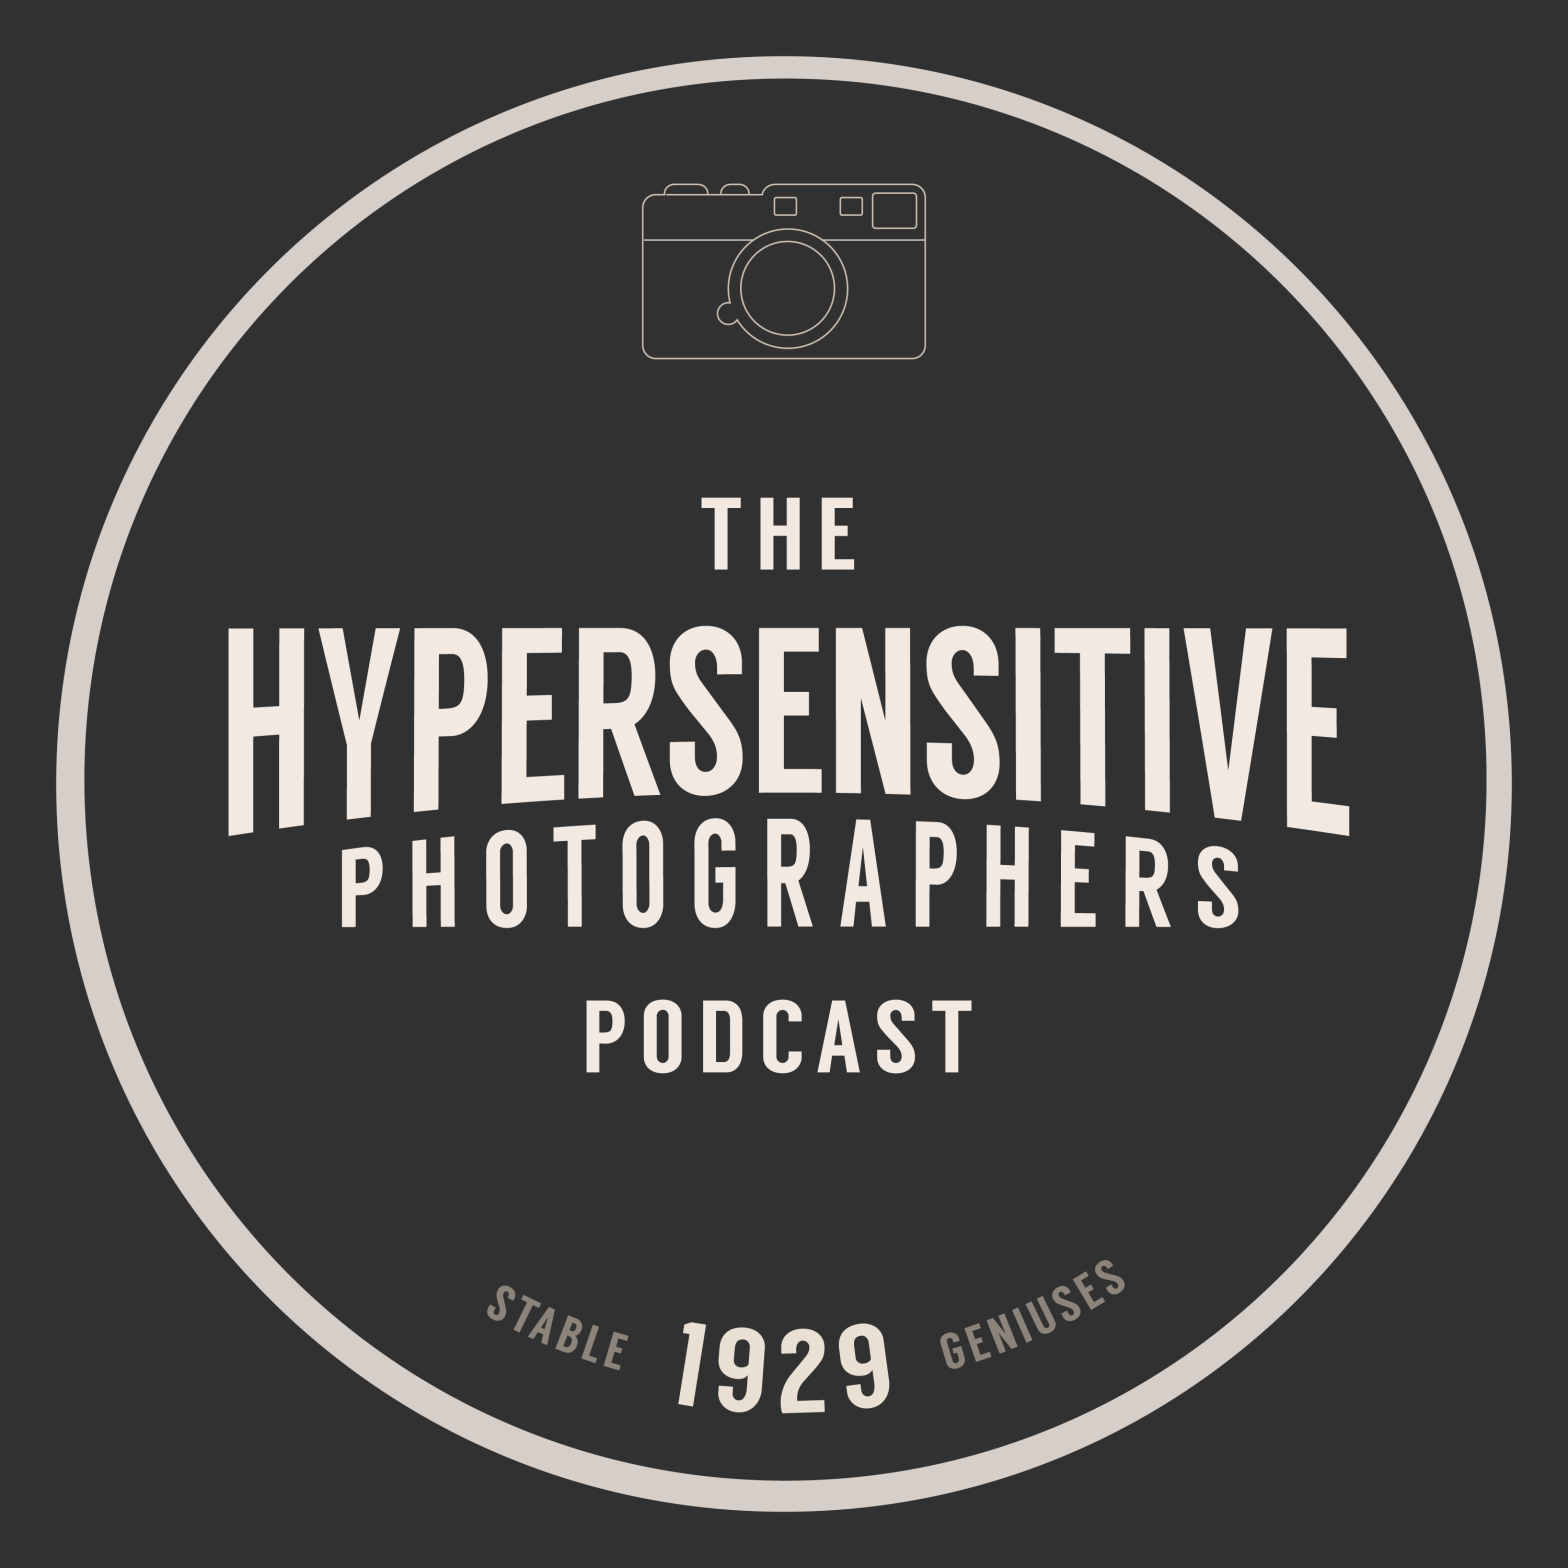 The Hypersensitive Podcast Episode 08.1: Motivation, stopping -ISM and powering the Matrix